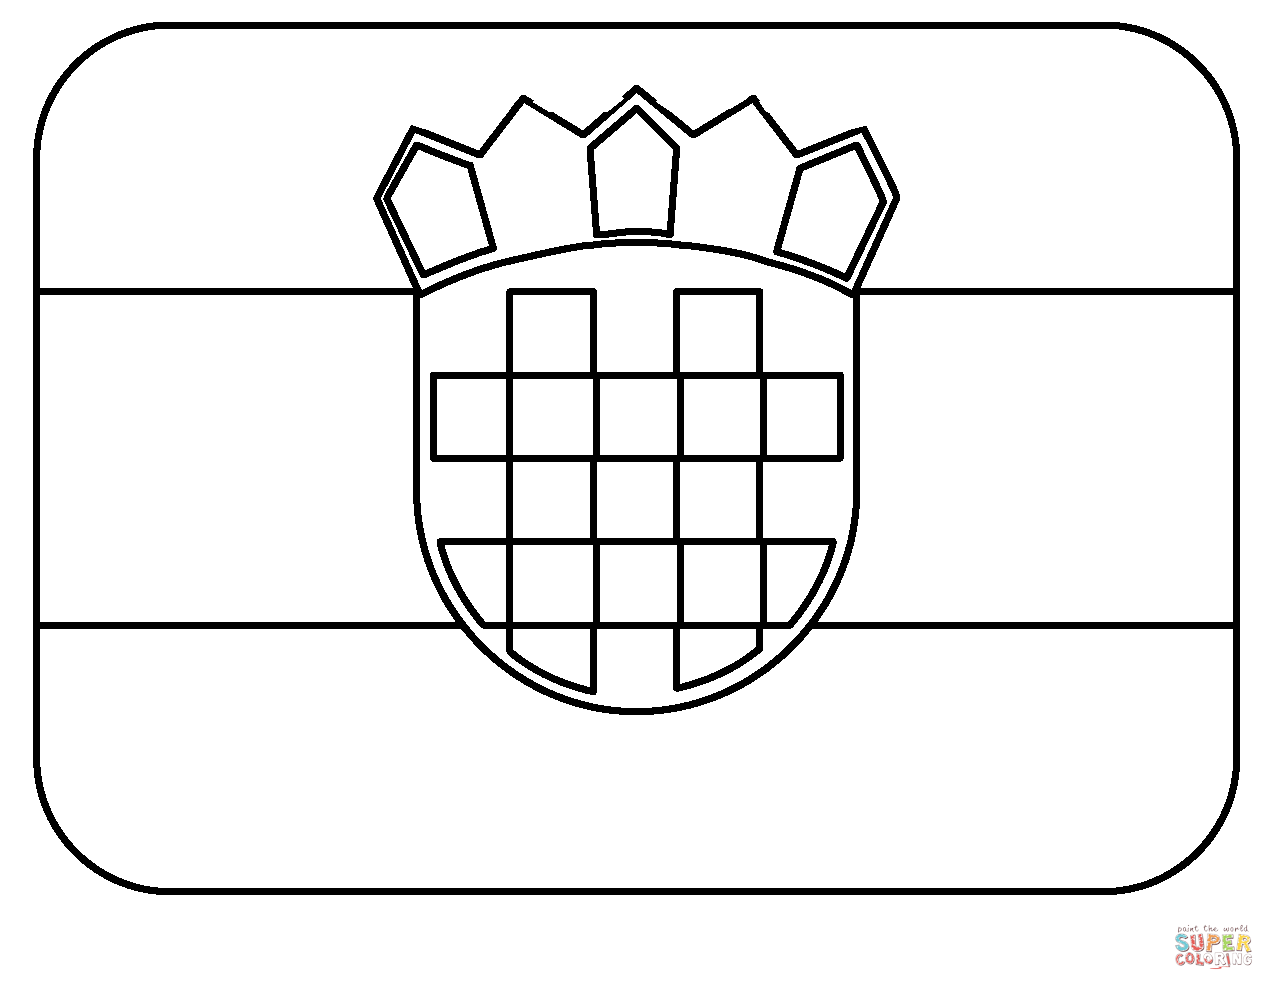 Flag of croatia emoji coloring page free printable coloring pages